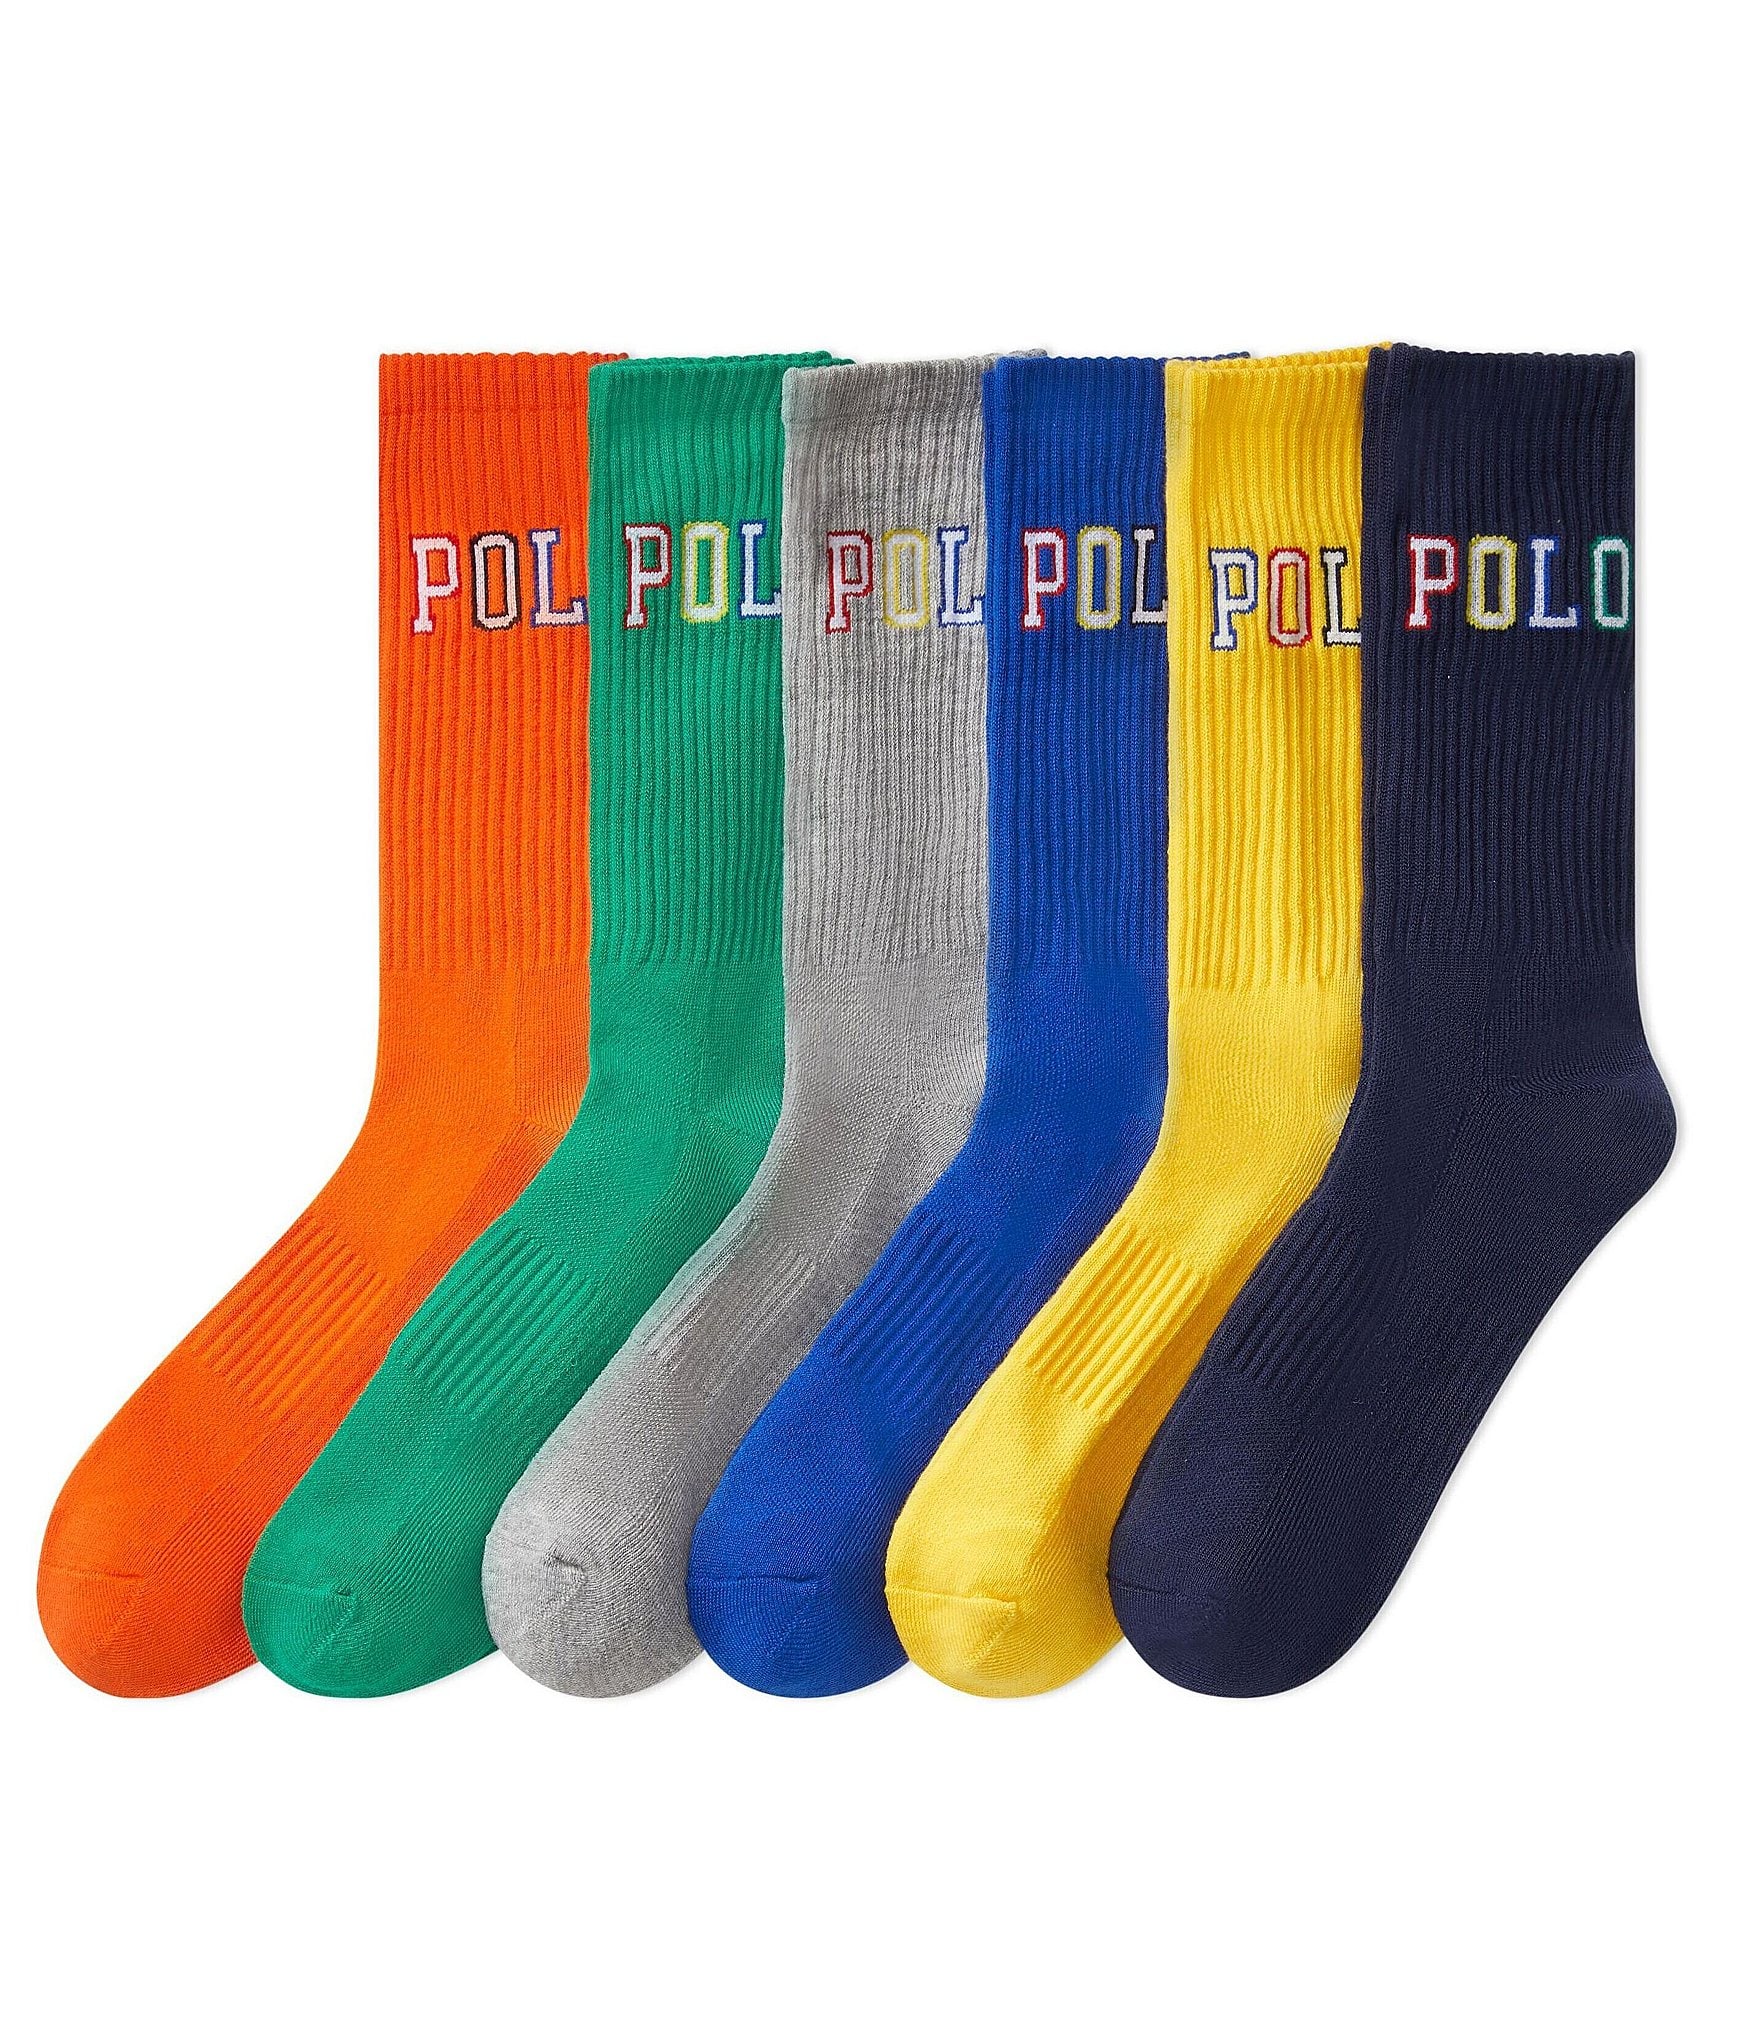 Polo Ralph Lauren Polo Outlined Crew Socks 6-Pack - One Size